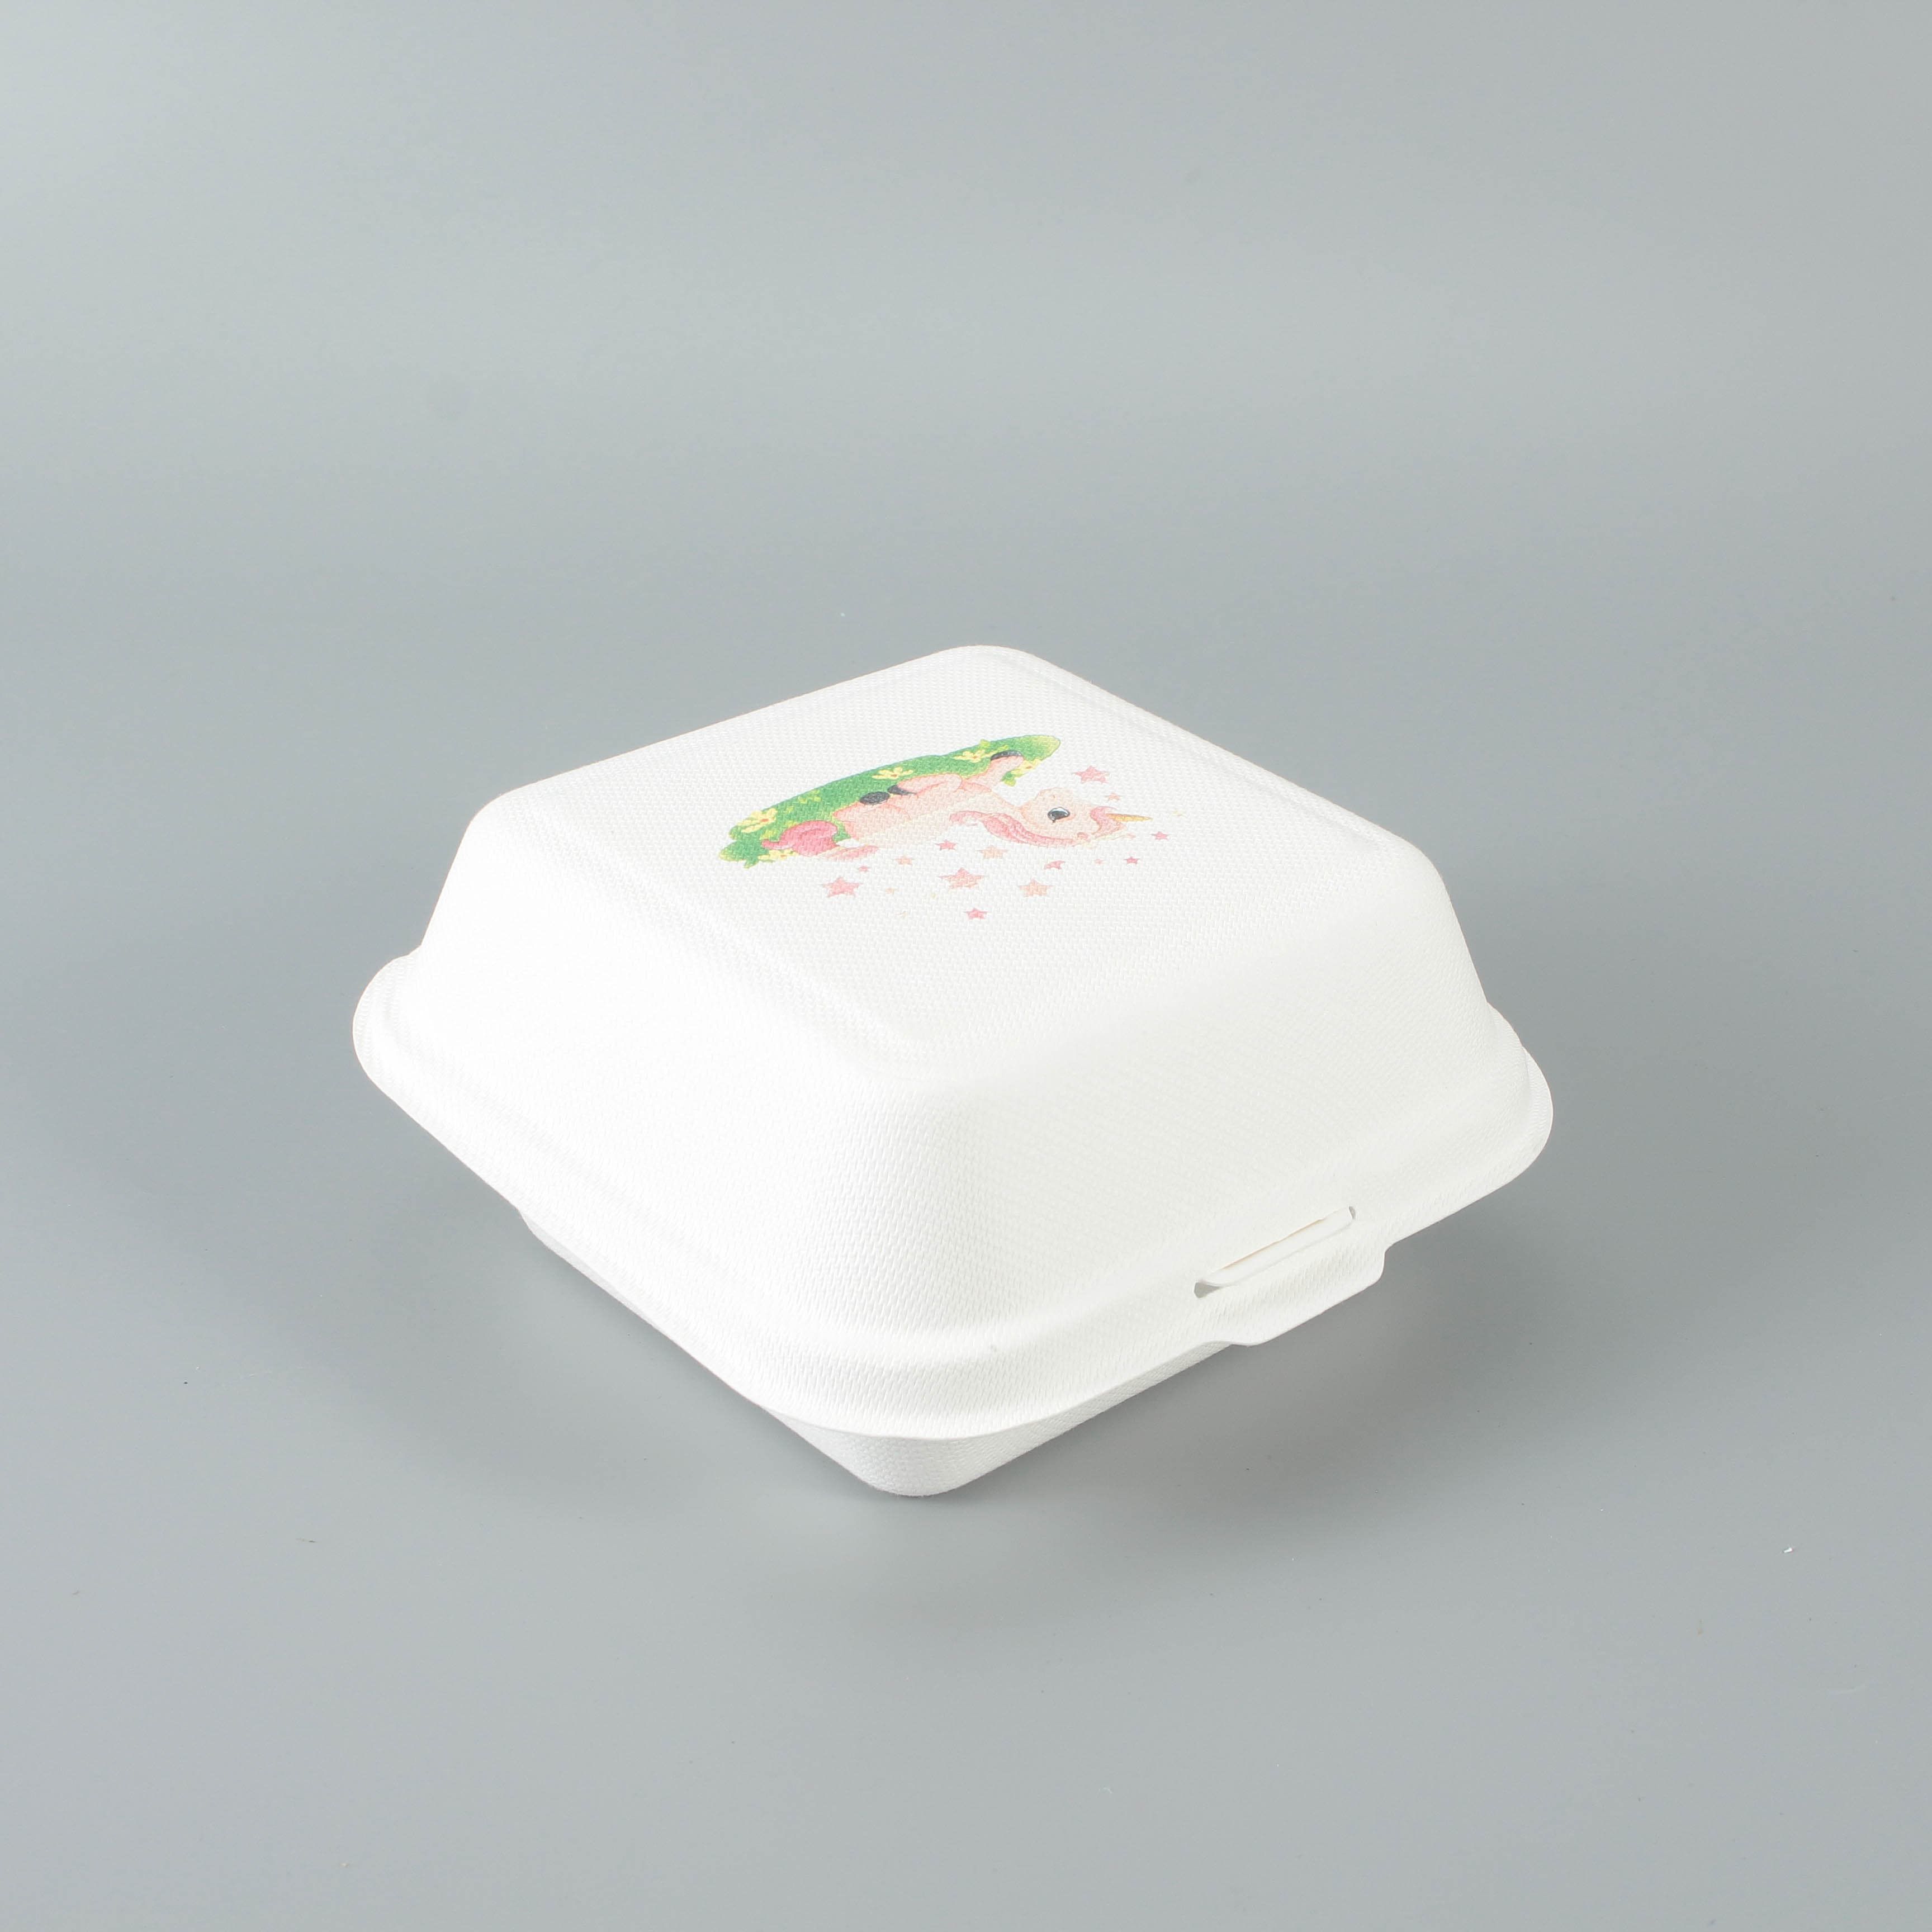 6x6 Biodegradable Clamshell Container | WL-P61